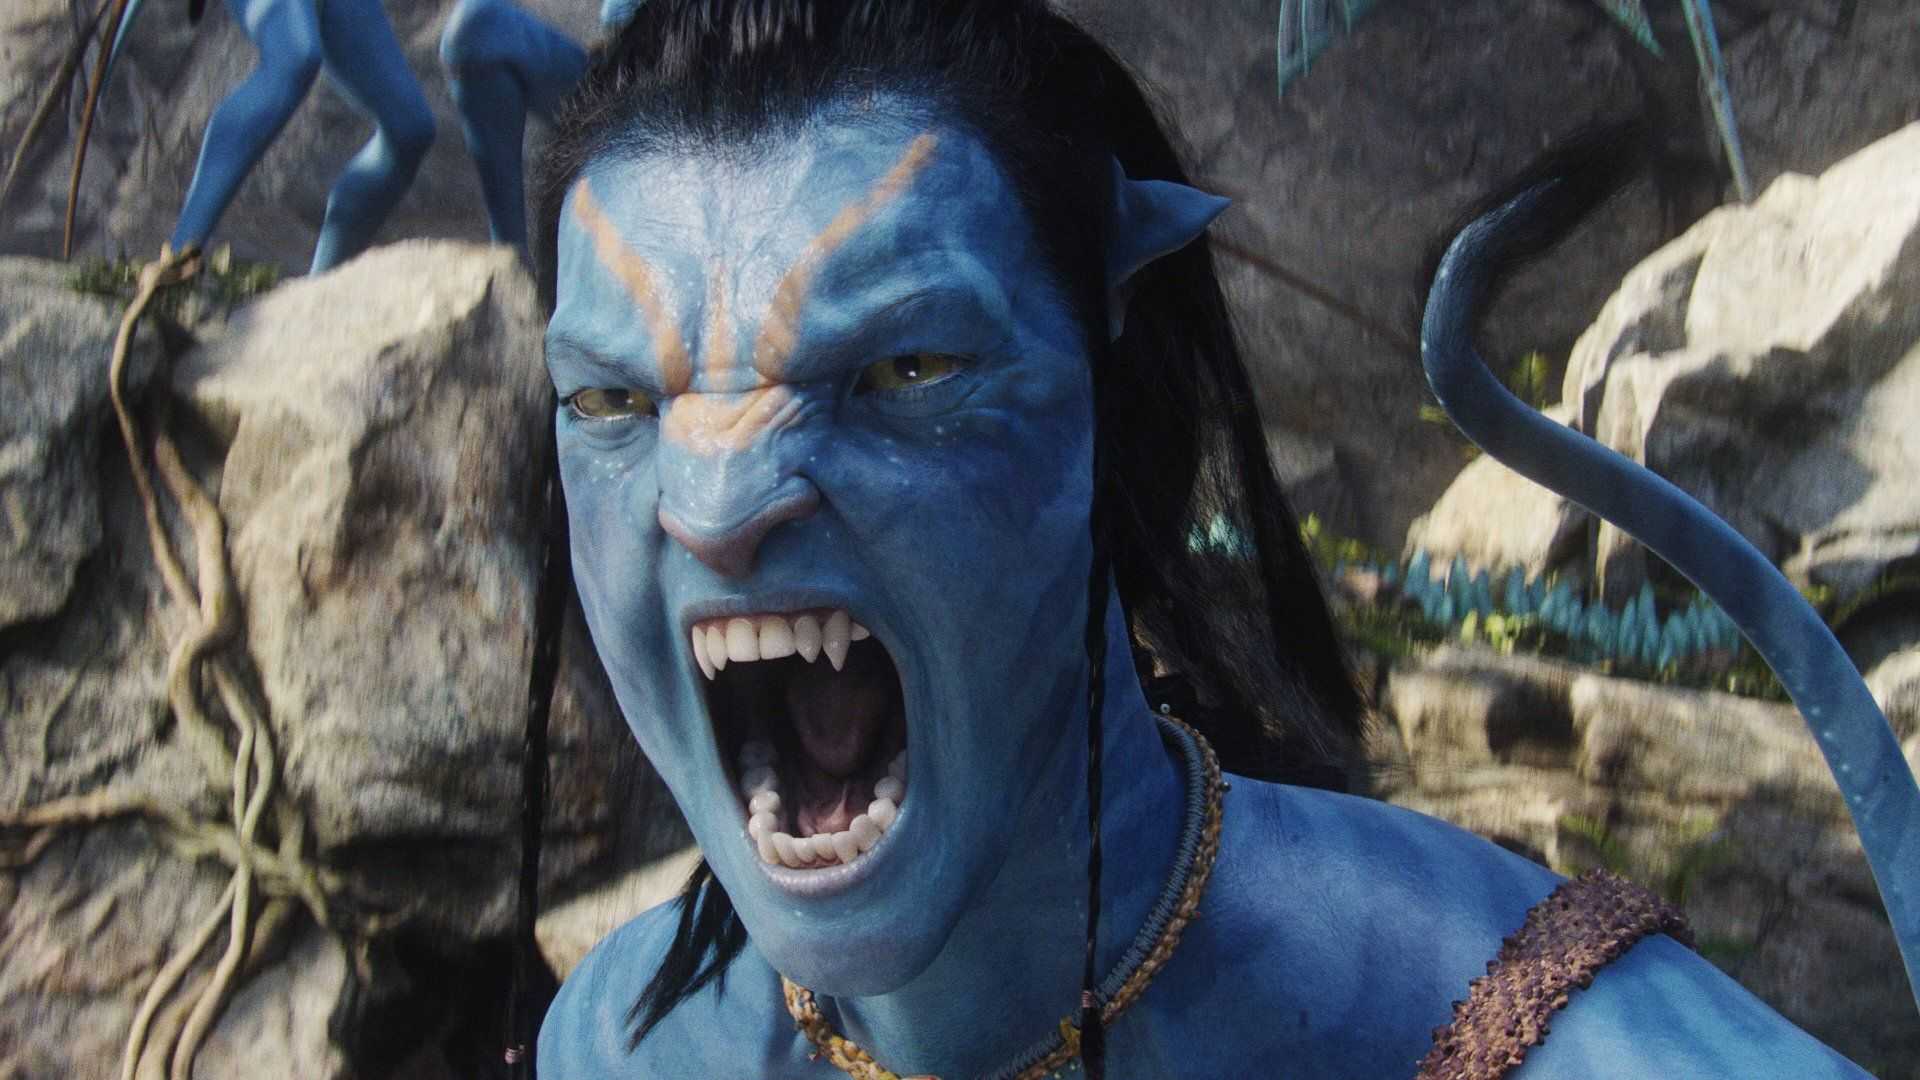 Avatar: The Way of Water Review - James Cameron crafts a sequel that shatters the cinematic benchmarks set by the original